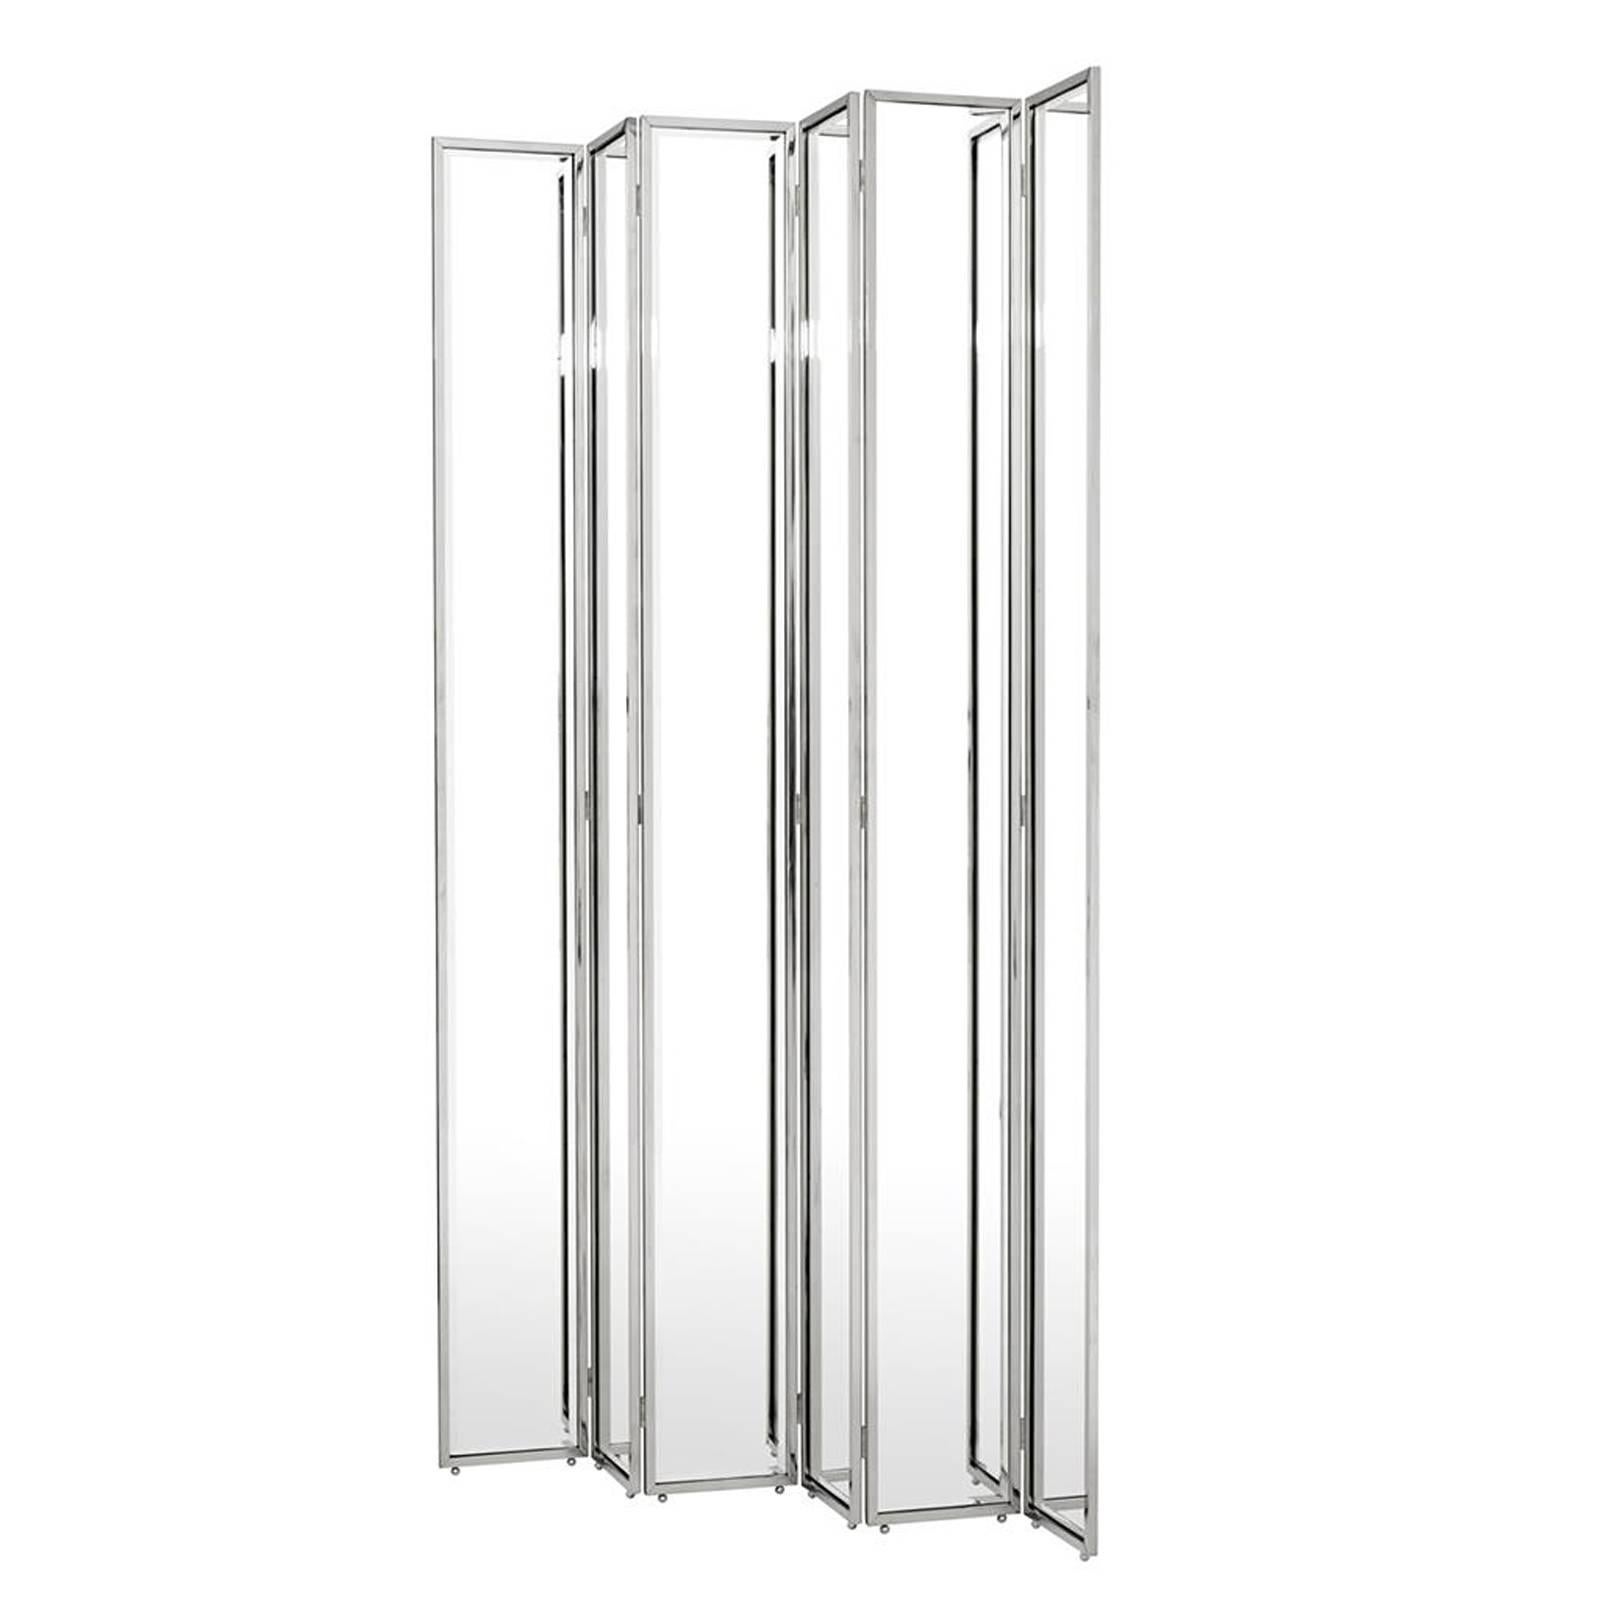 Beveled Miss Folding Screen in Gold Finish or Polished Stainless Steel Finish For Sale